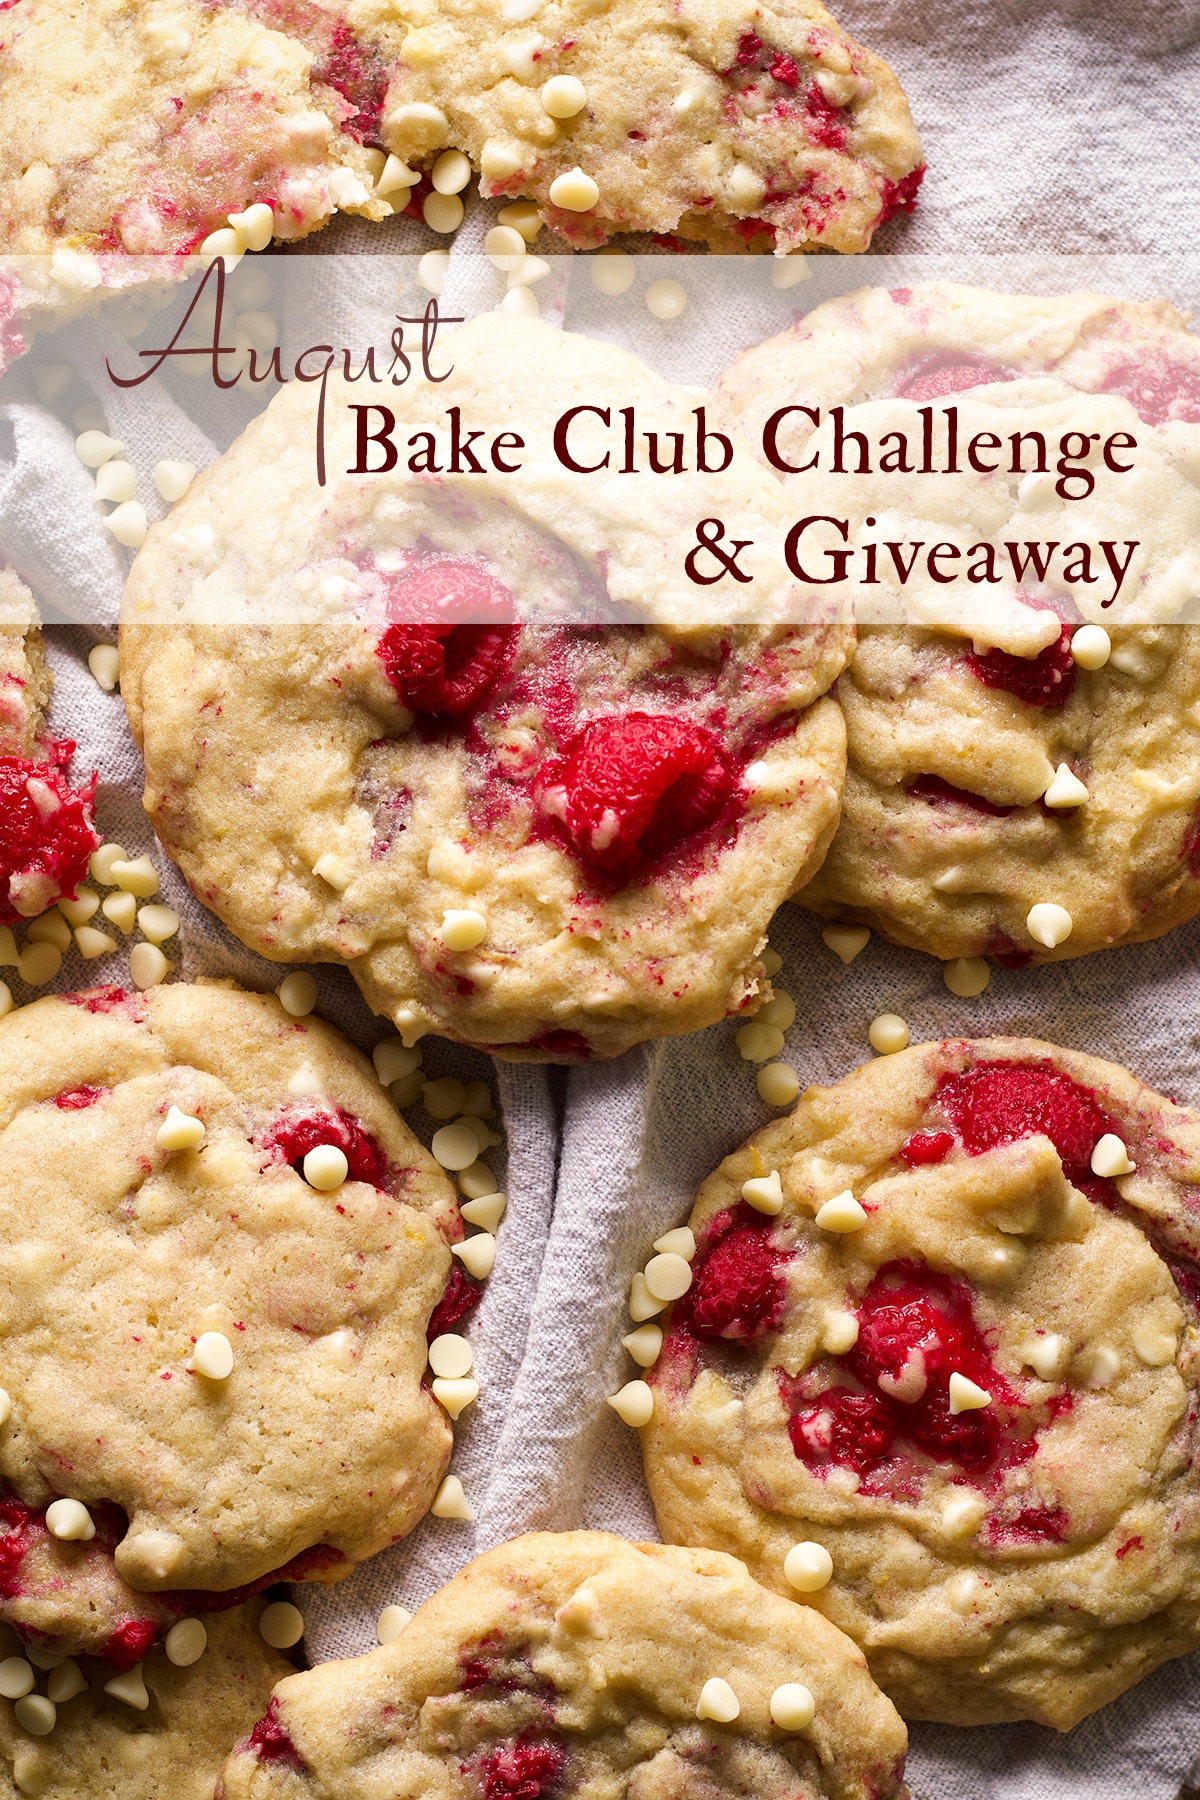 The August 2022 Bake Club Challenge Recipe is White Chocolate Raspberry cookies